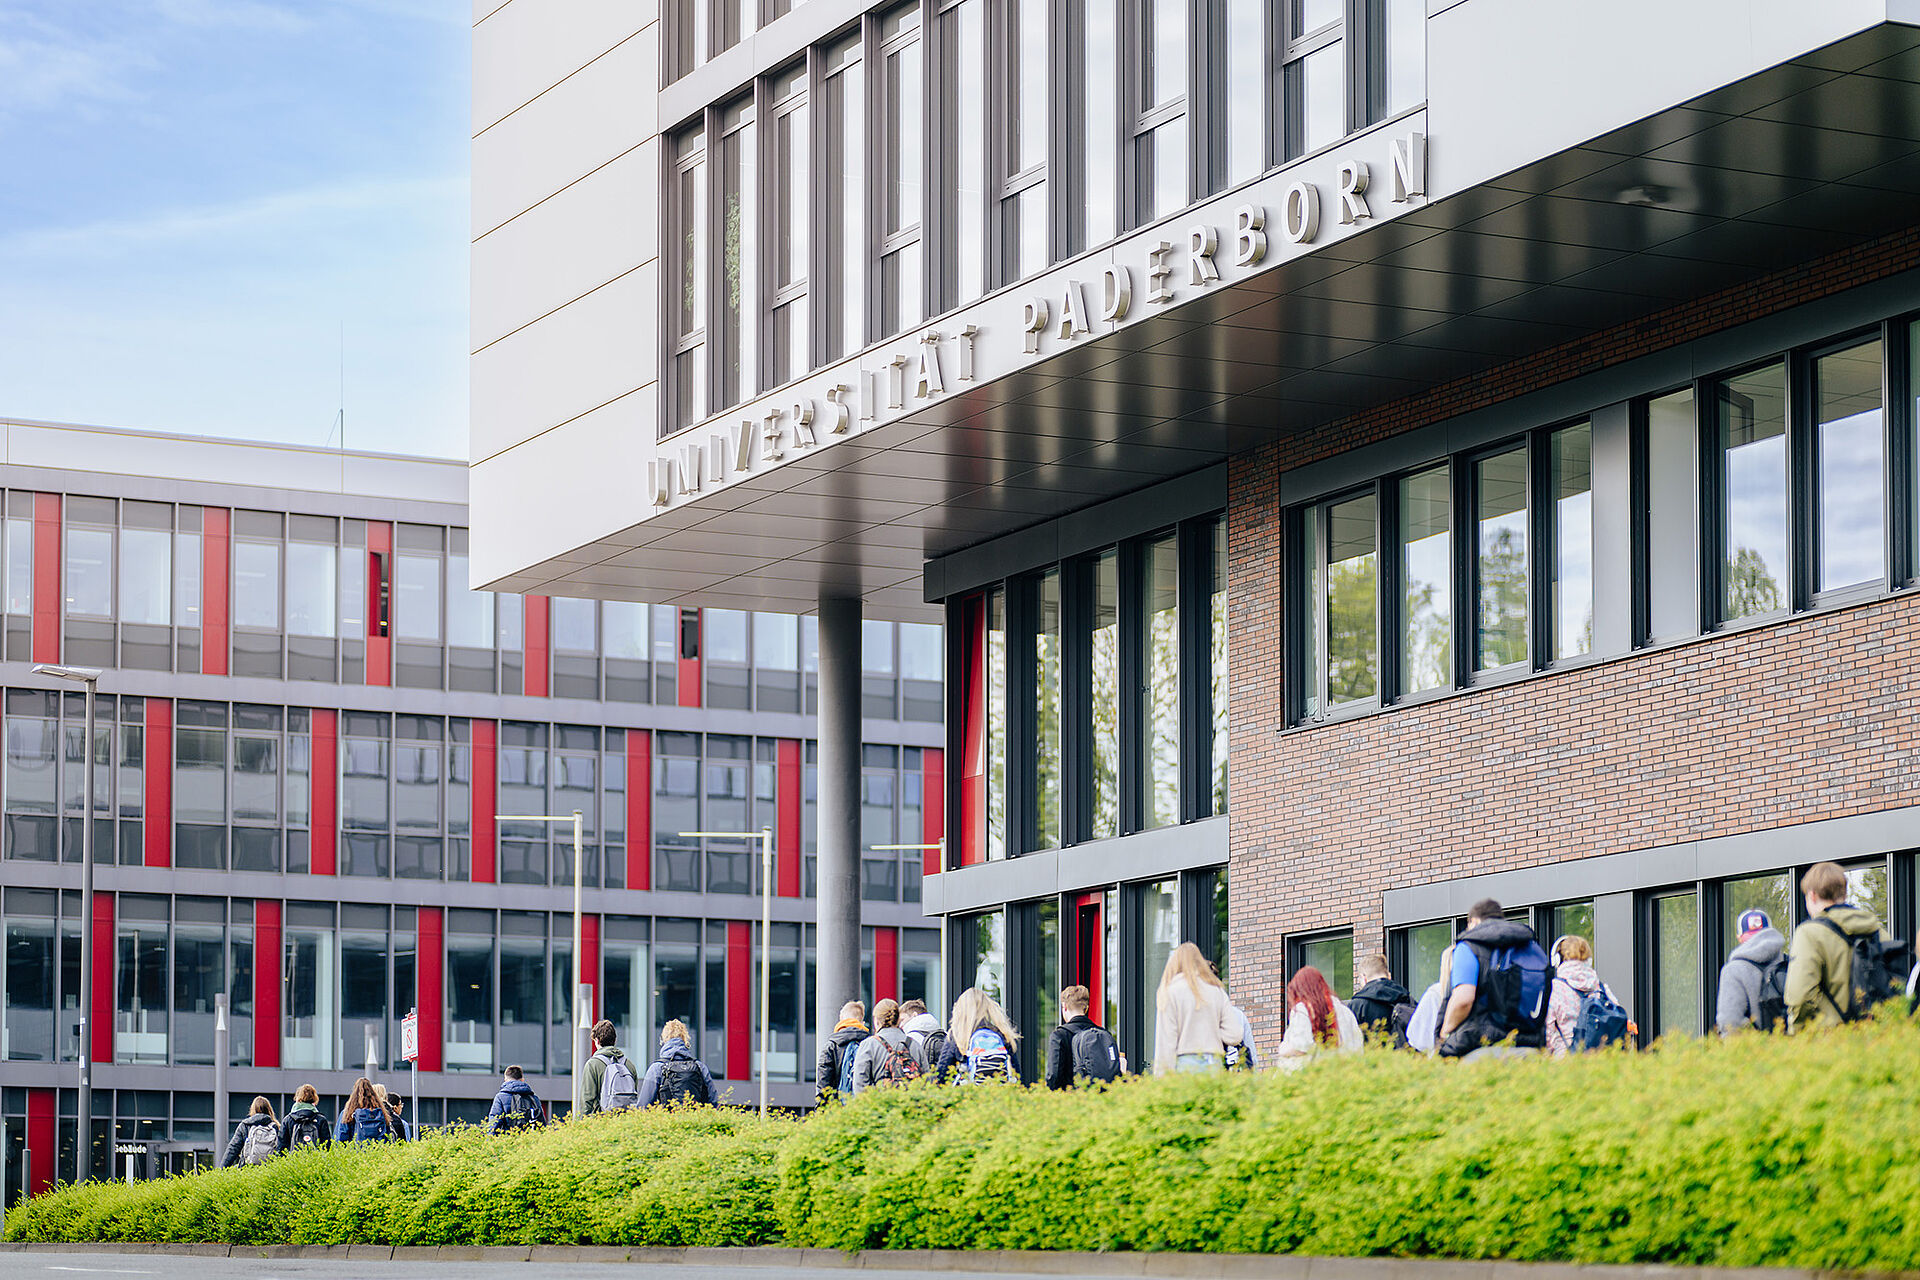 In the foreground, a part of building Q with the lettering "Universität Paderborn", in front of which more than 20 students are passing by; in the background, building I.